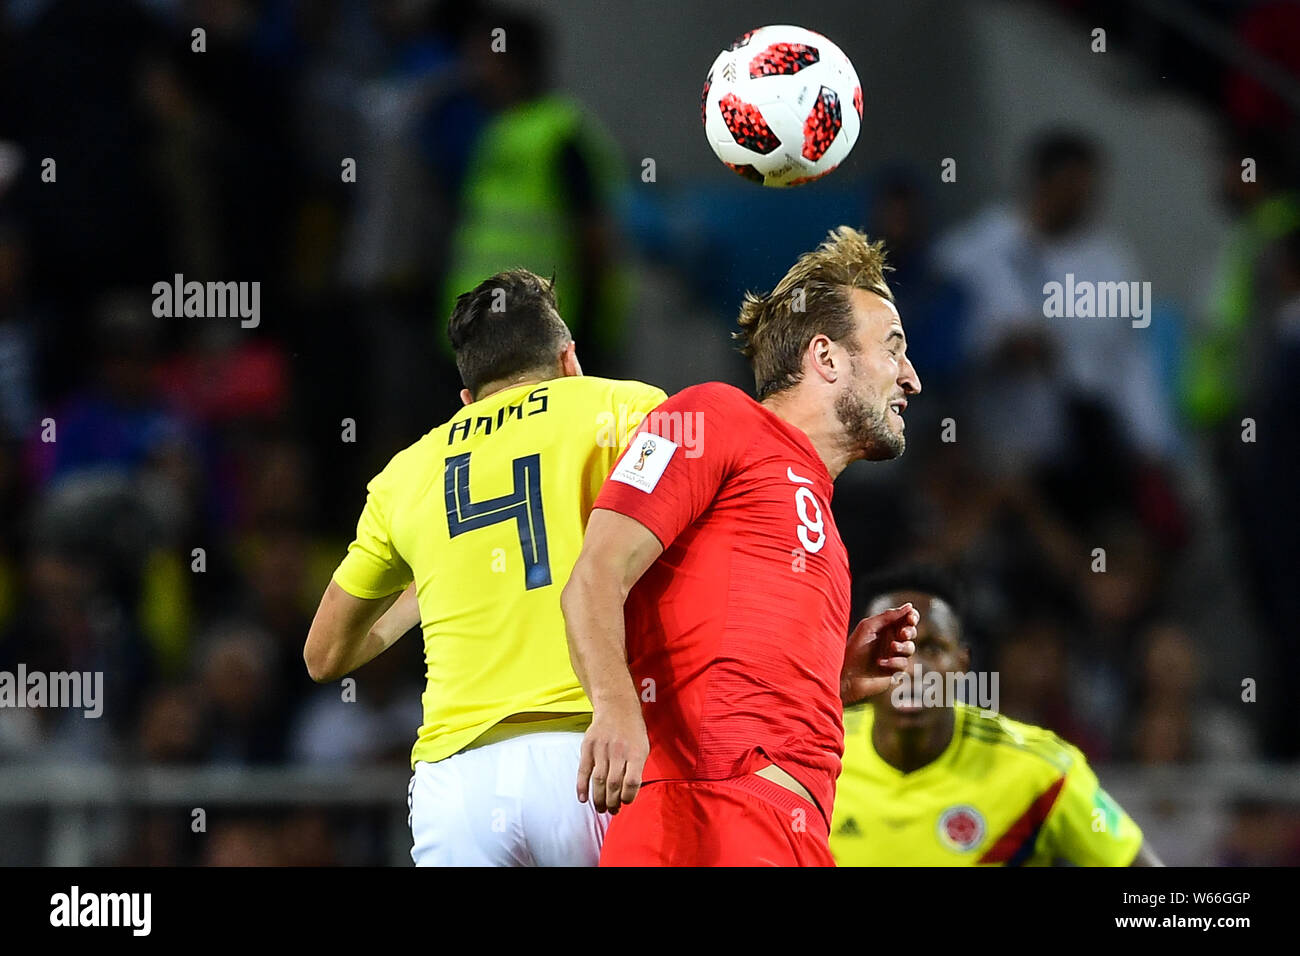 Harry Kane of England, right, heads the ball against Santiago Arias of Columbia in their Round of 16 match during the 2018 FIFA World Cup in Moscow, R Stock Photo